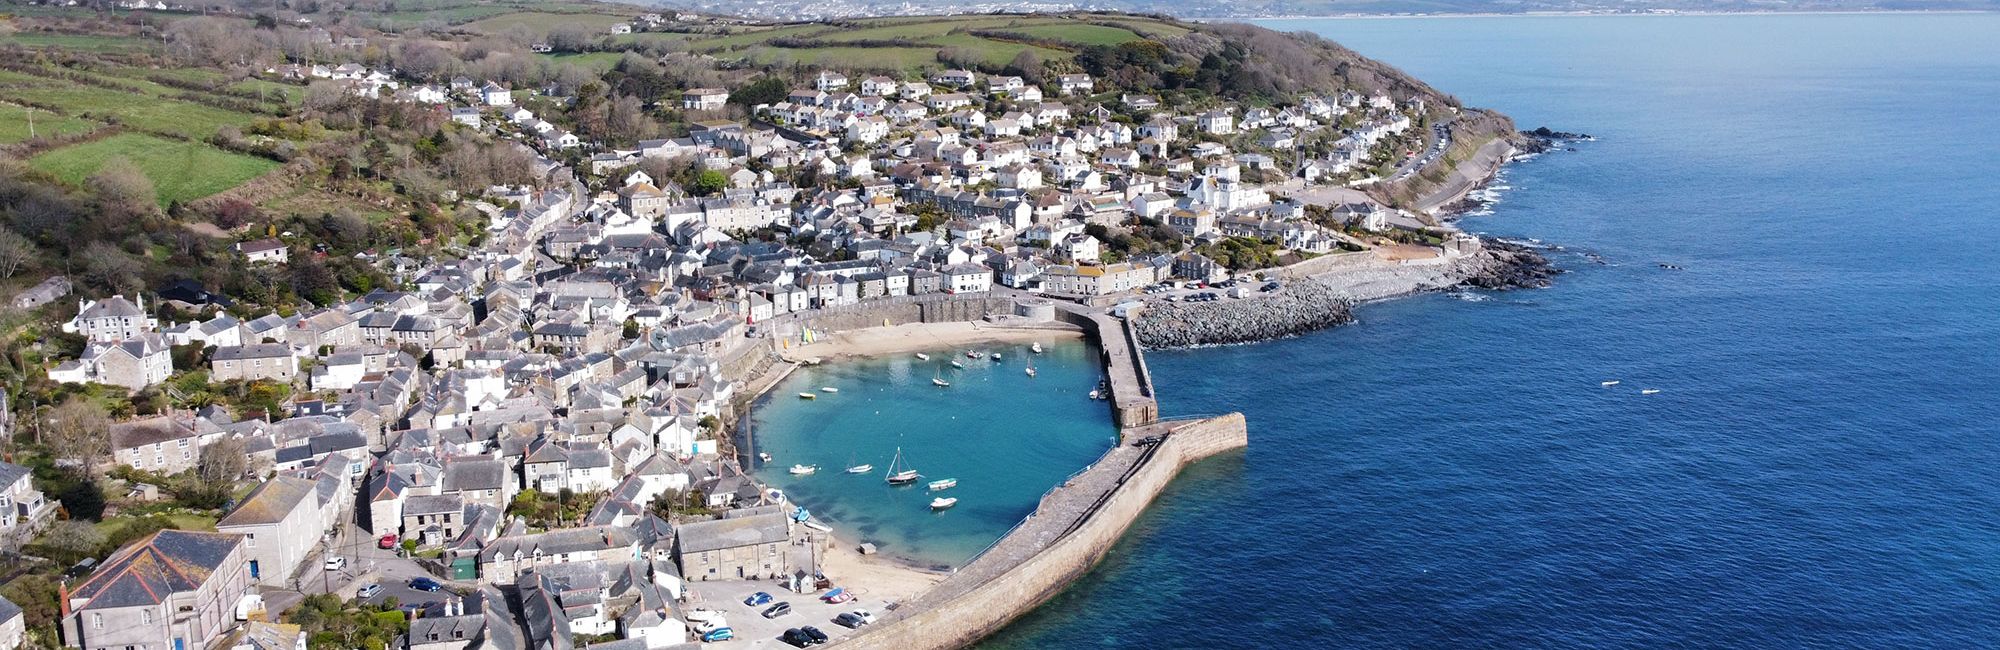 View of Mousehole in Cornwall